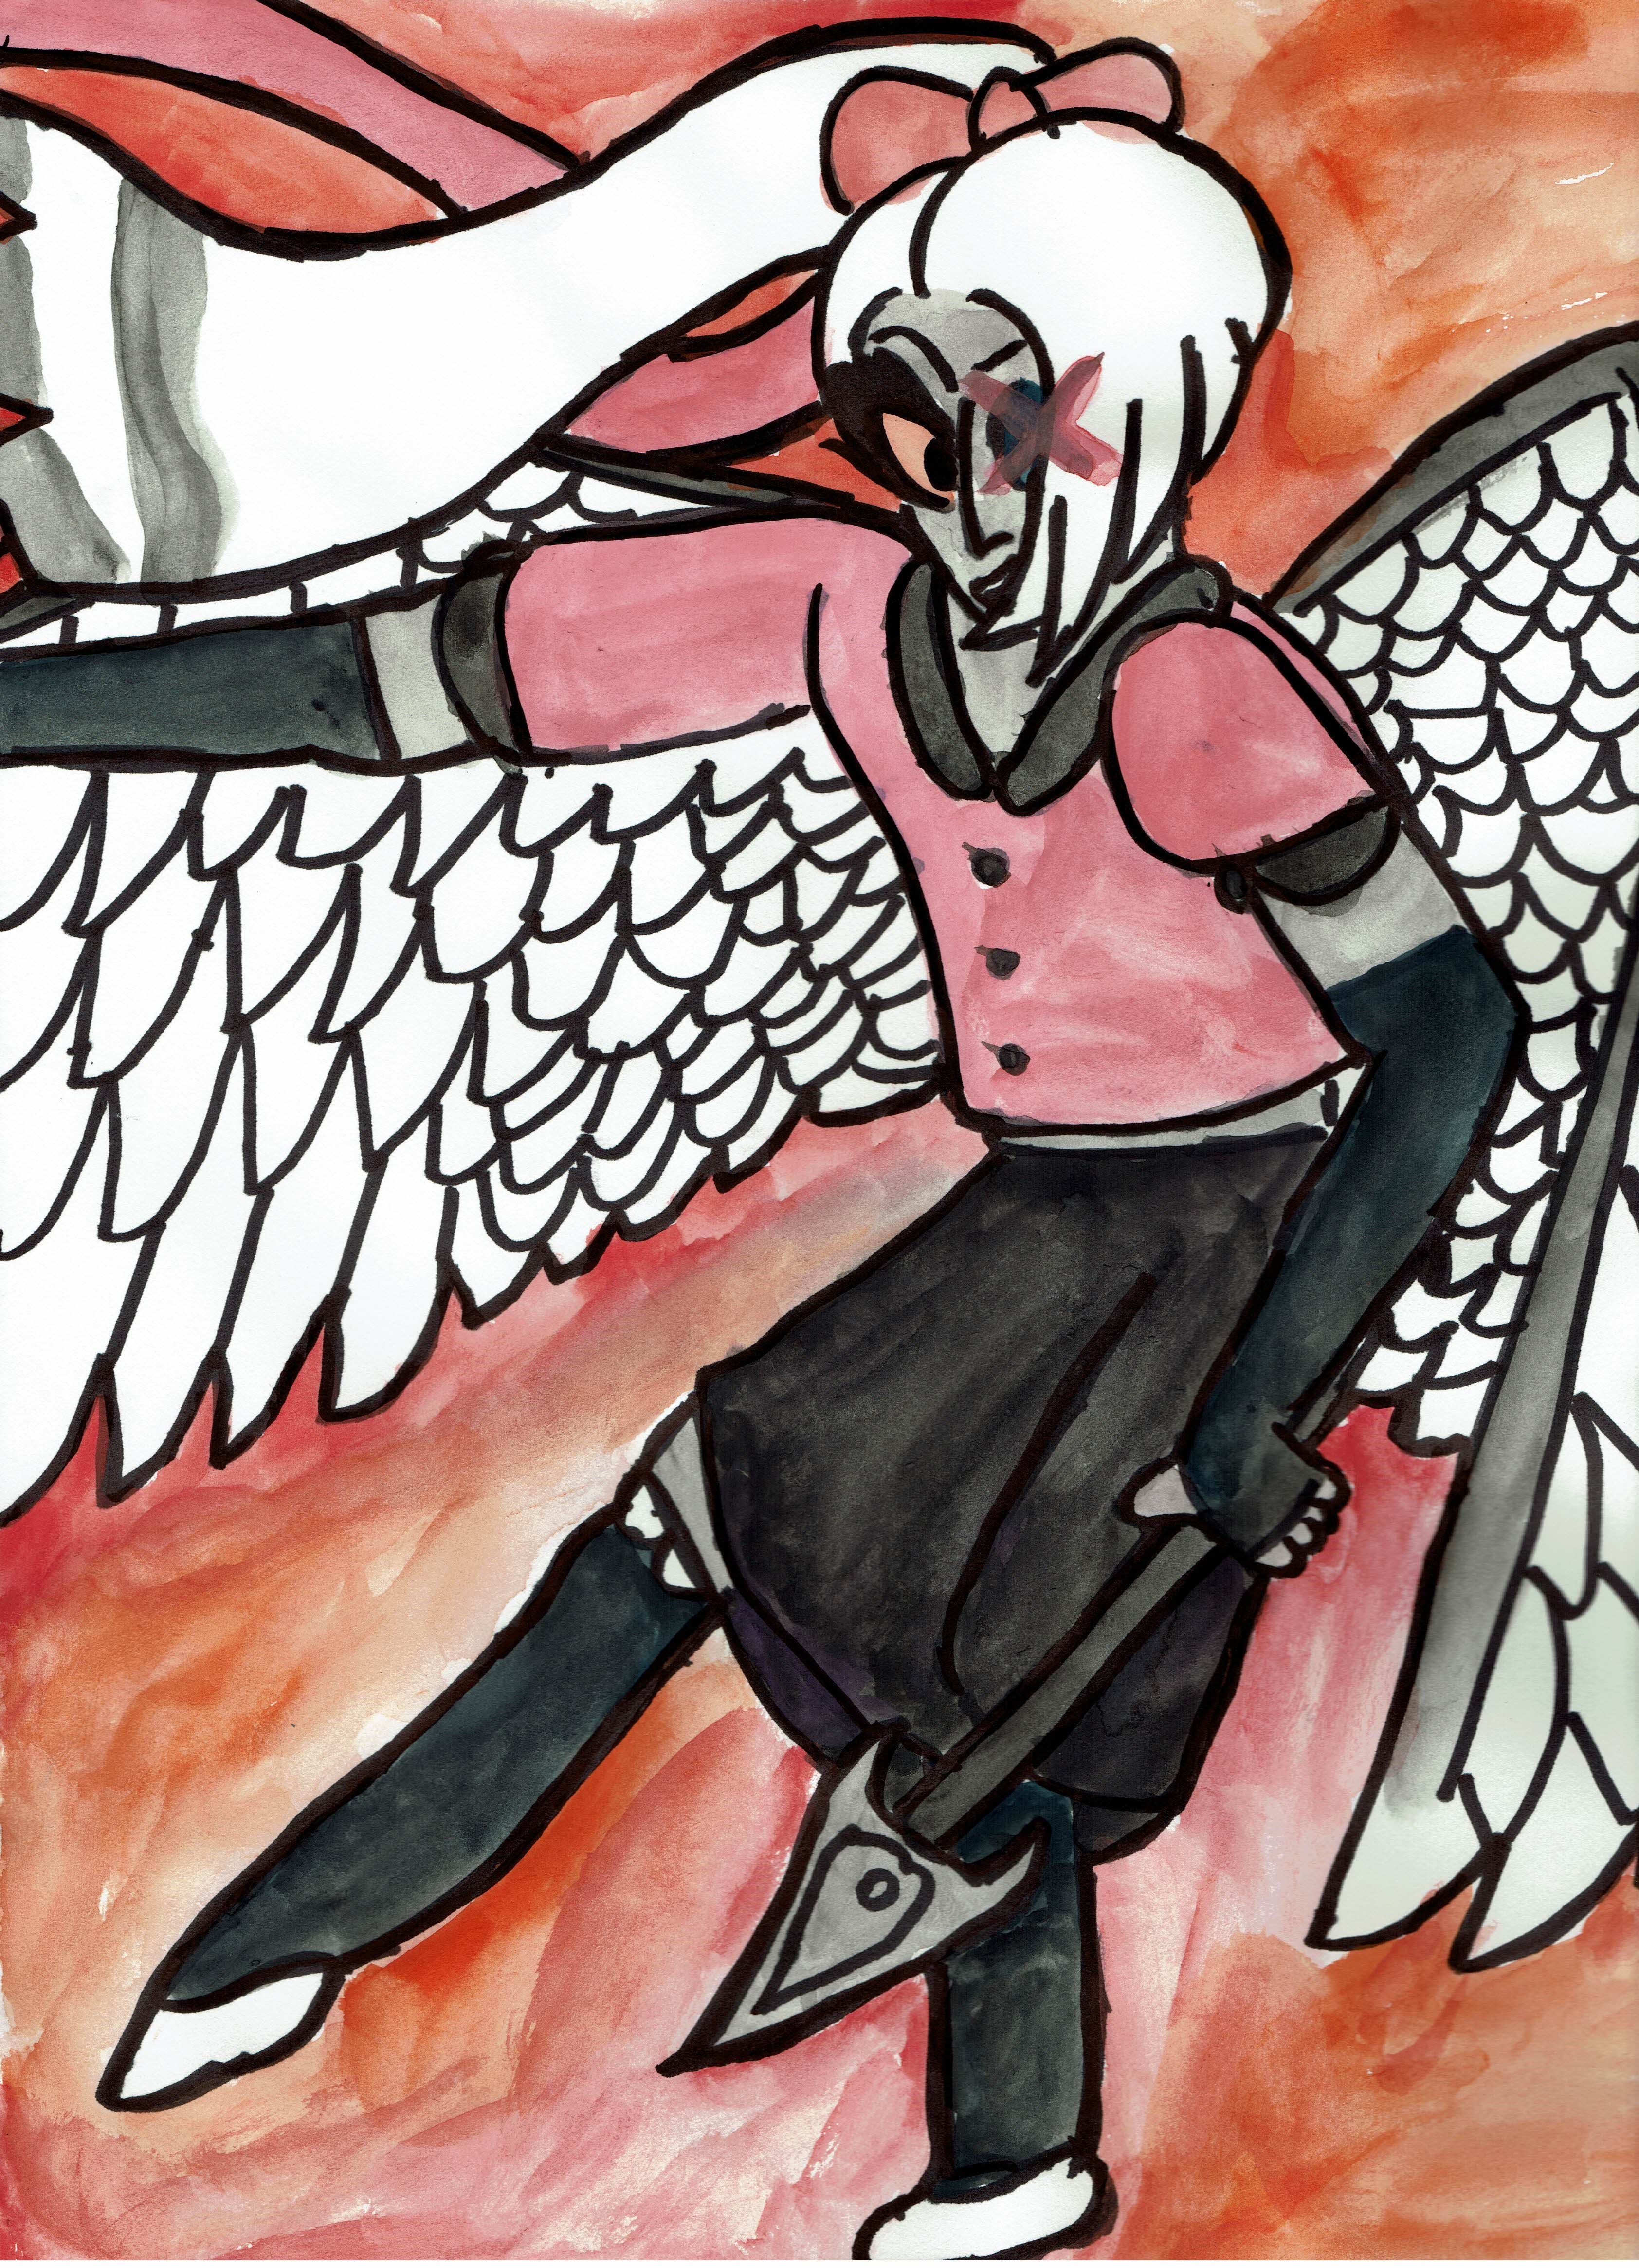 a watercolor and sharpie picture of Vaggie, the character from Hazbin Hotel, mid-flight in a battle pose with her spear. I love badass women and also her face shape and hair and nose shape remind me of my partner <3.